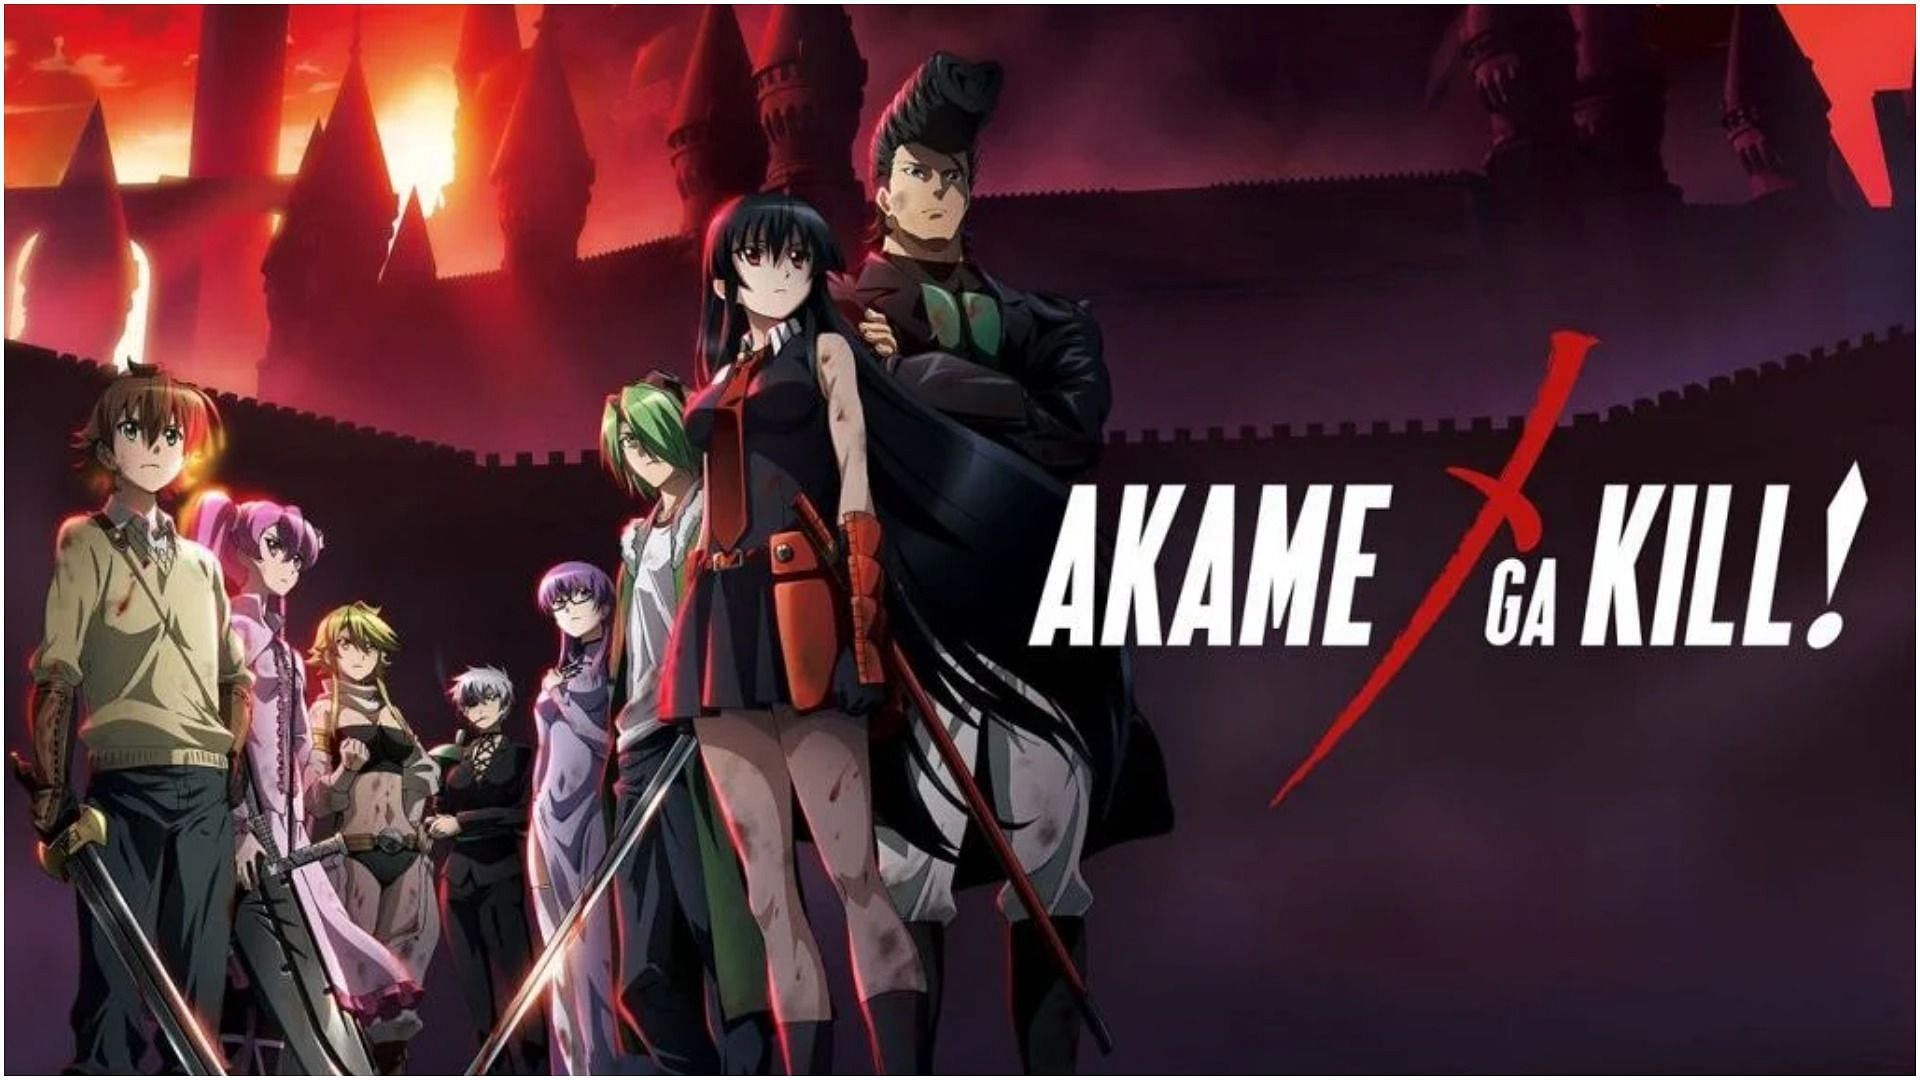 All characters of Akame ga Kill! as seen in the anime (Image via White Fox)